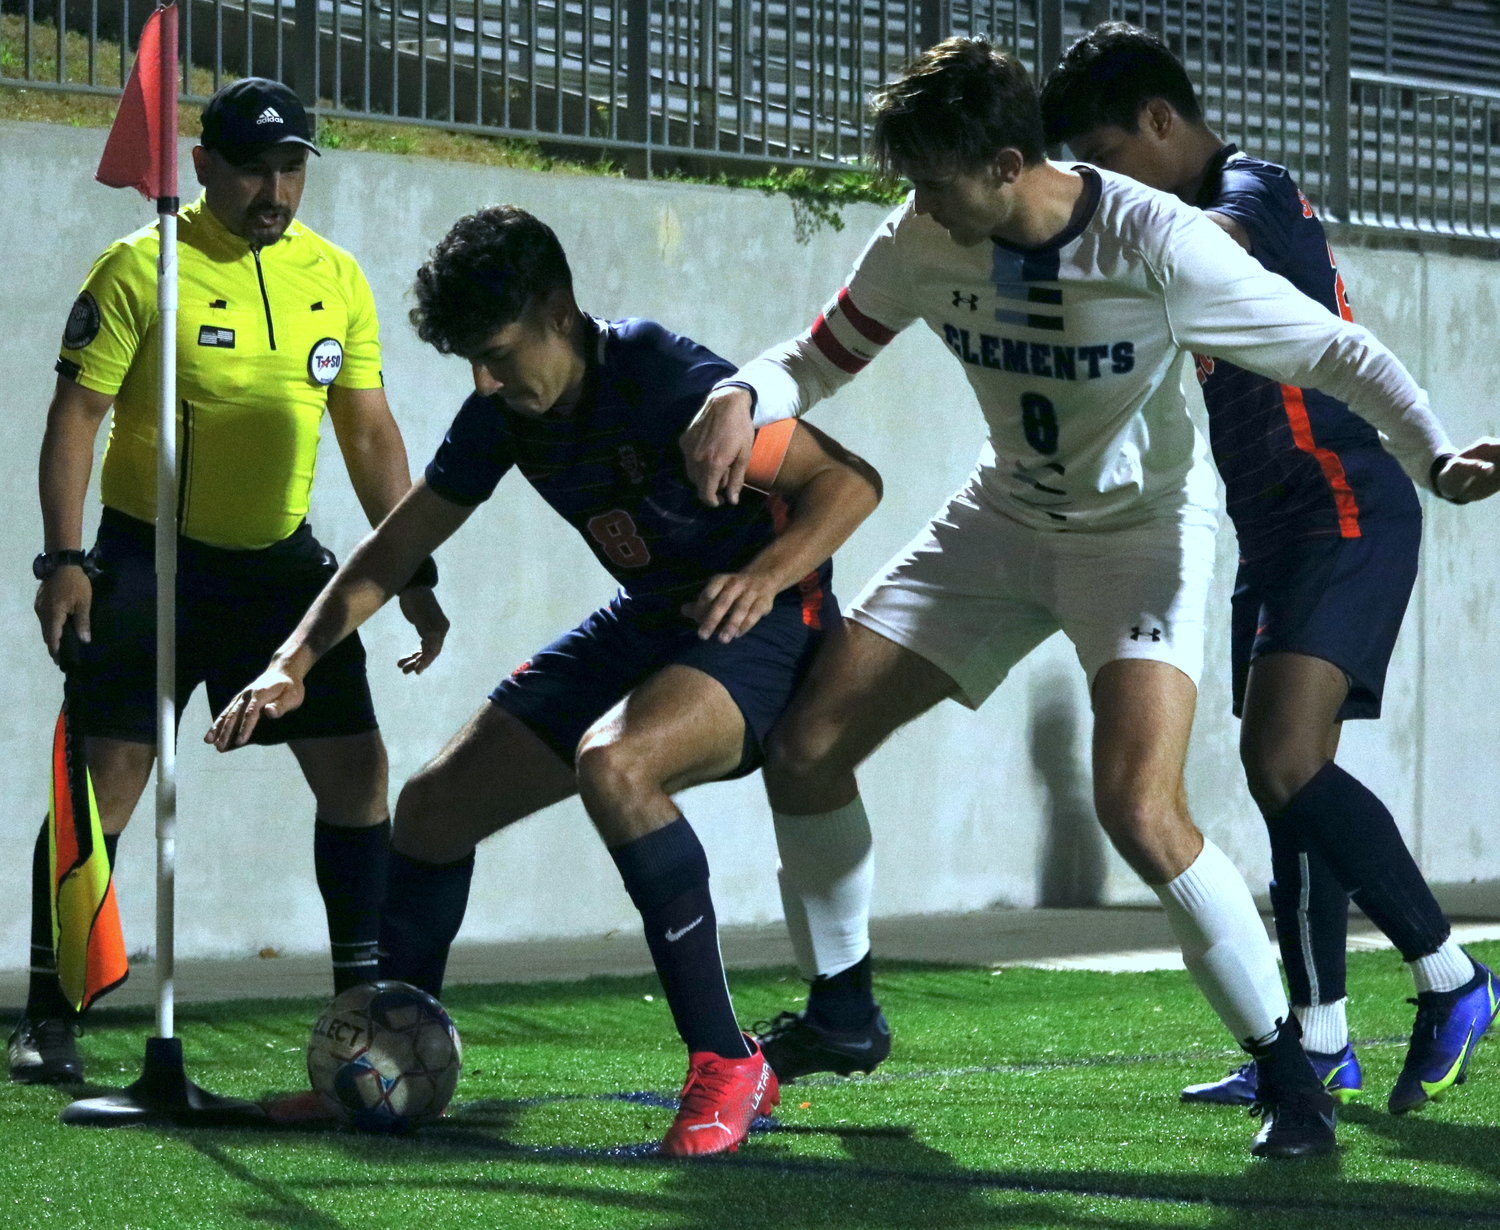 Javier Rivas fights to keep the ball in the corner during Thursday’s Class 6A bi-district game between Seven Lakes and Fort Bend Clements at Legacy Stadium.